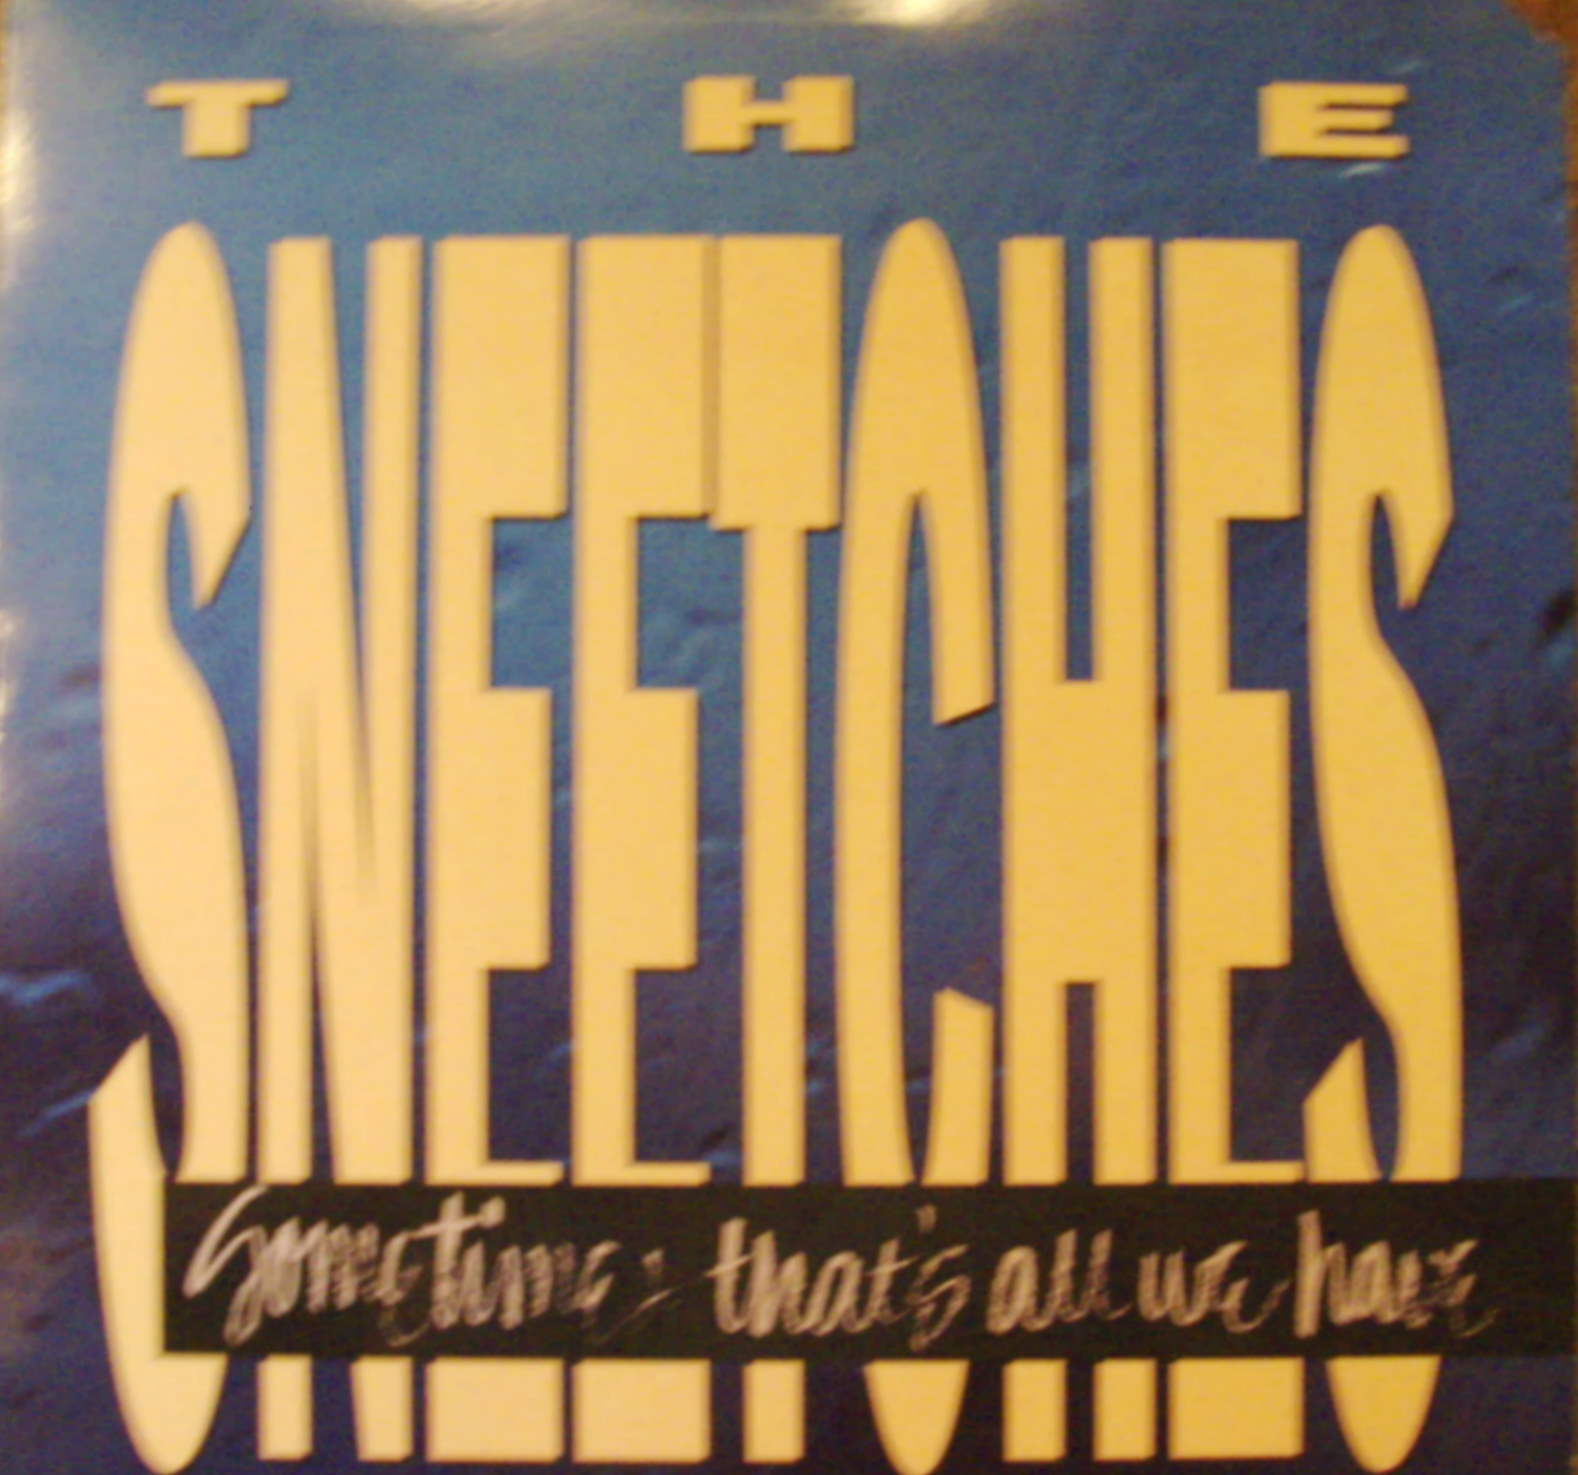 Sneetches / Sometimes That's All We Have